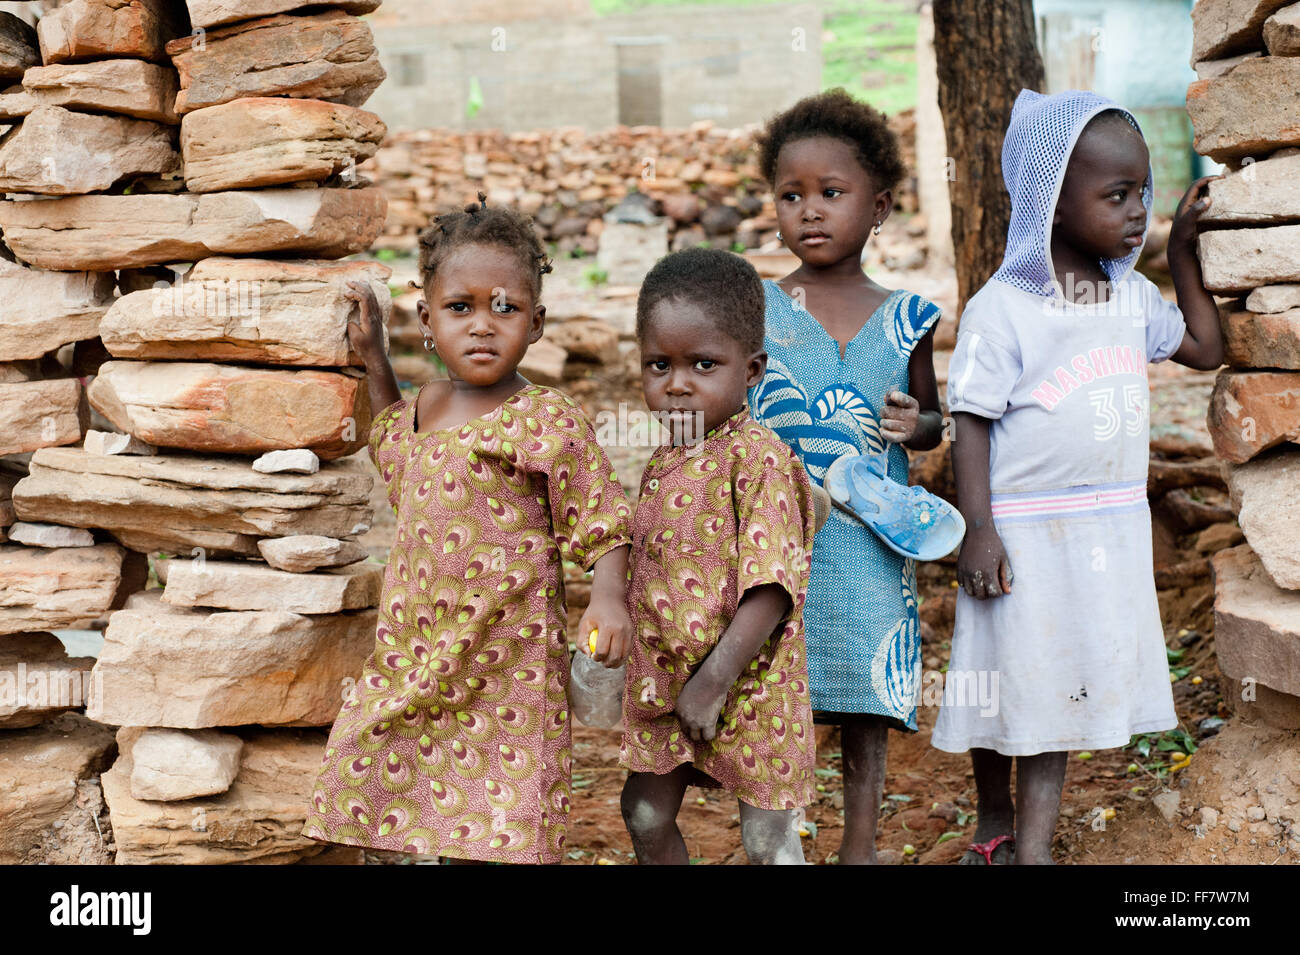 Mali, Africa - Group of black children in Africa Stock Photo